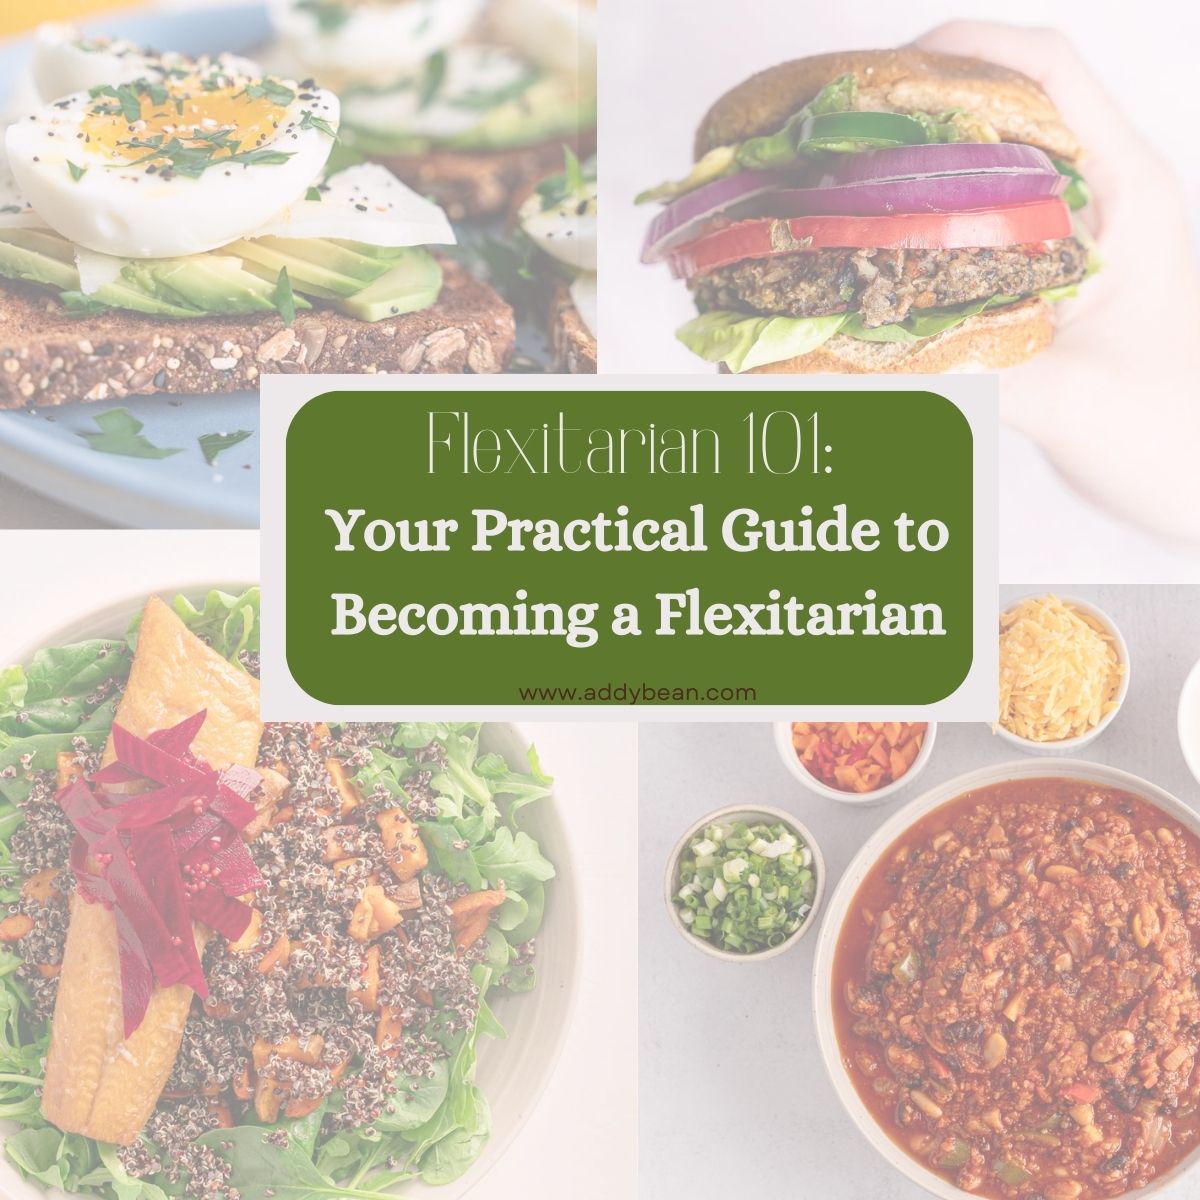 4 images of flexitarian food transparent in the background